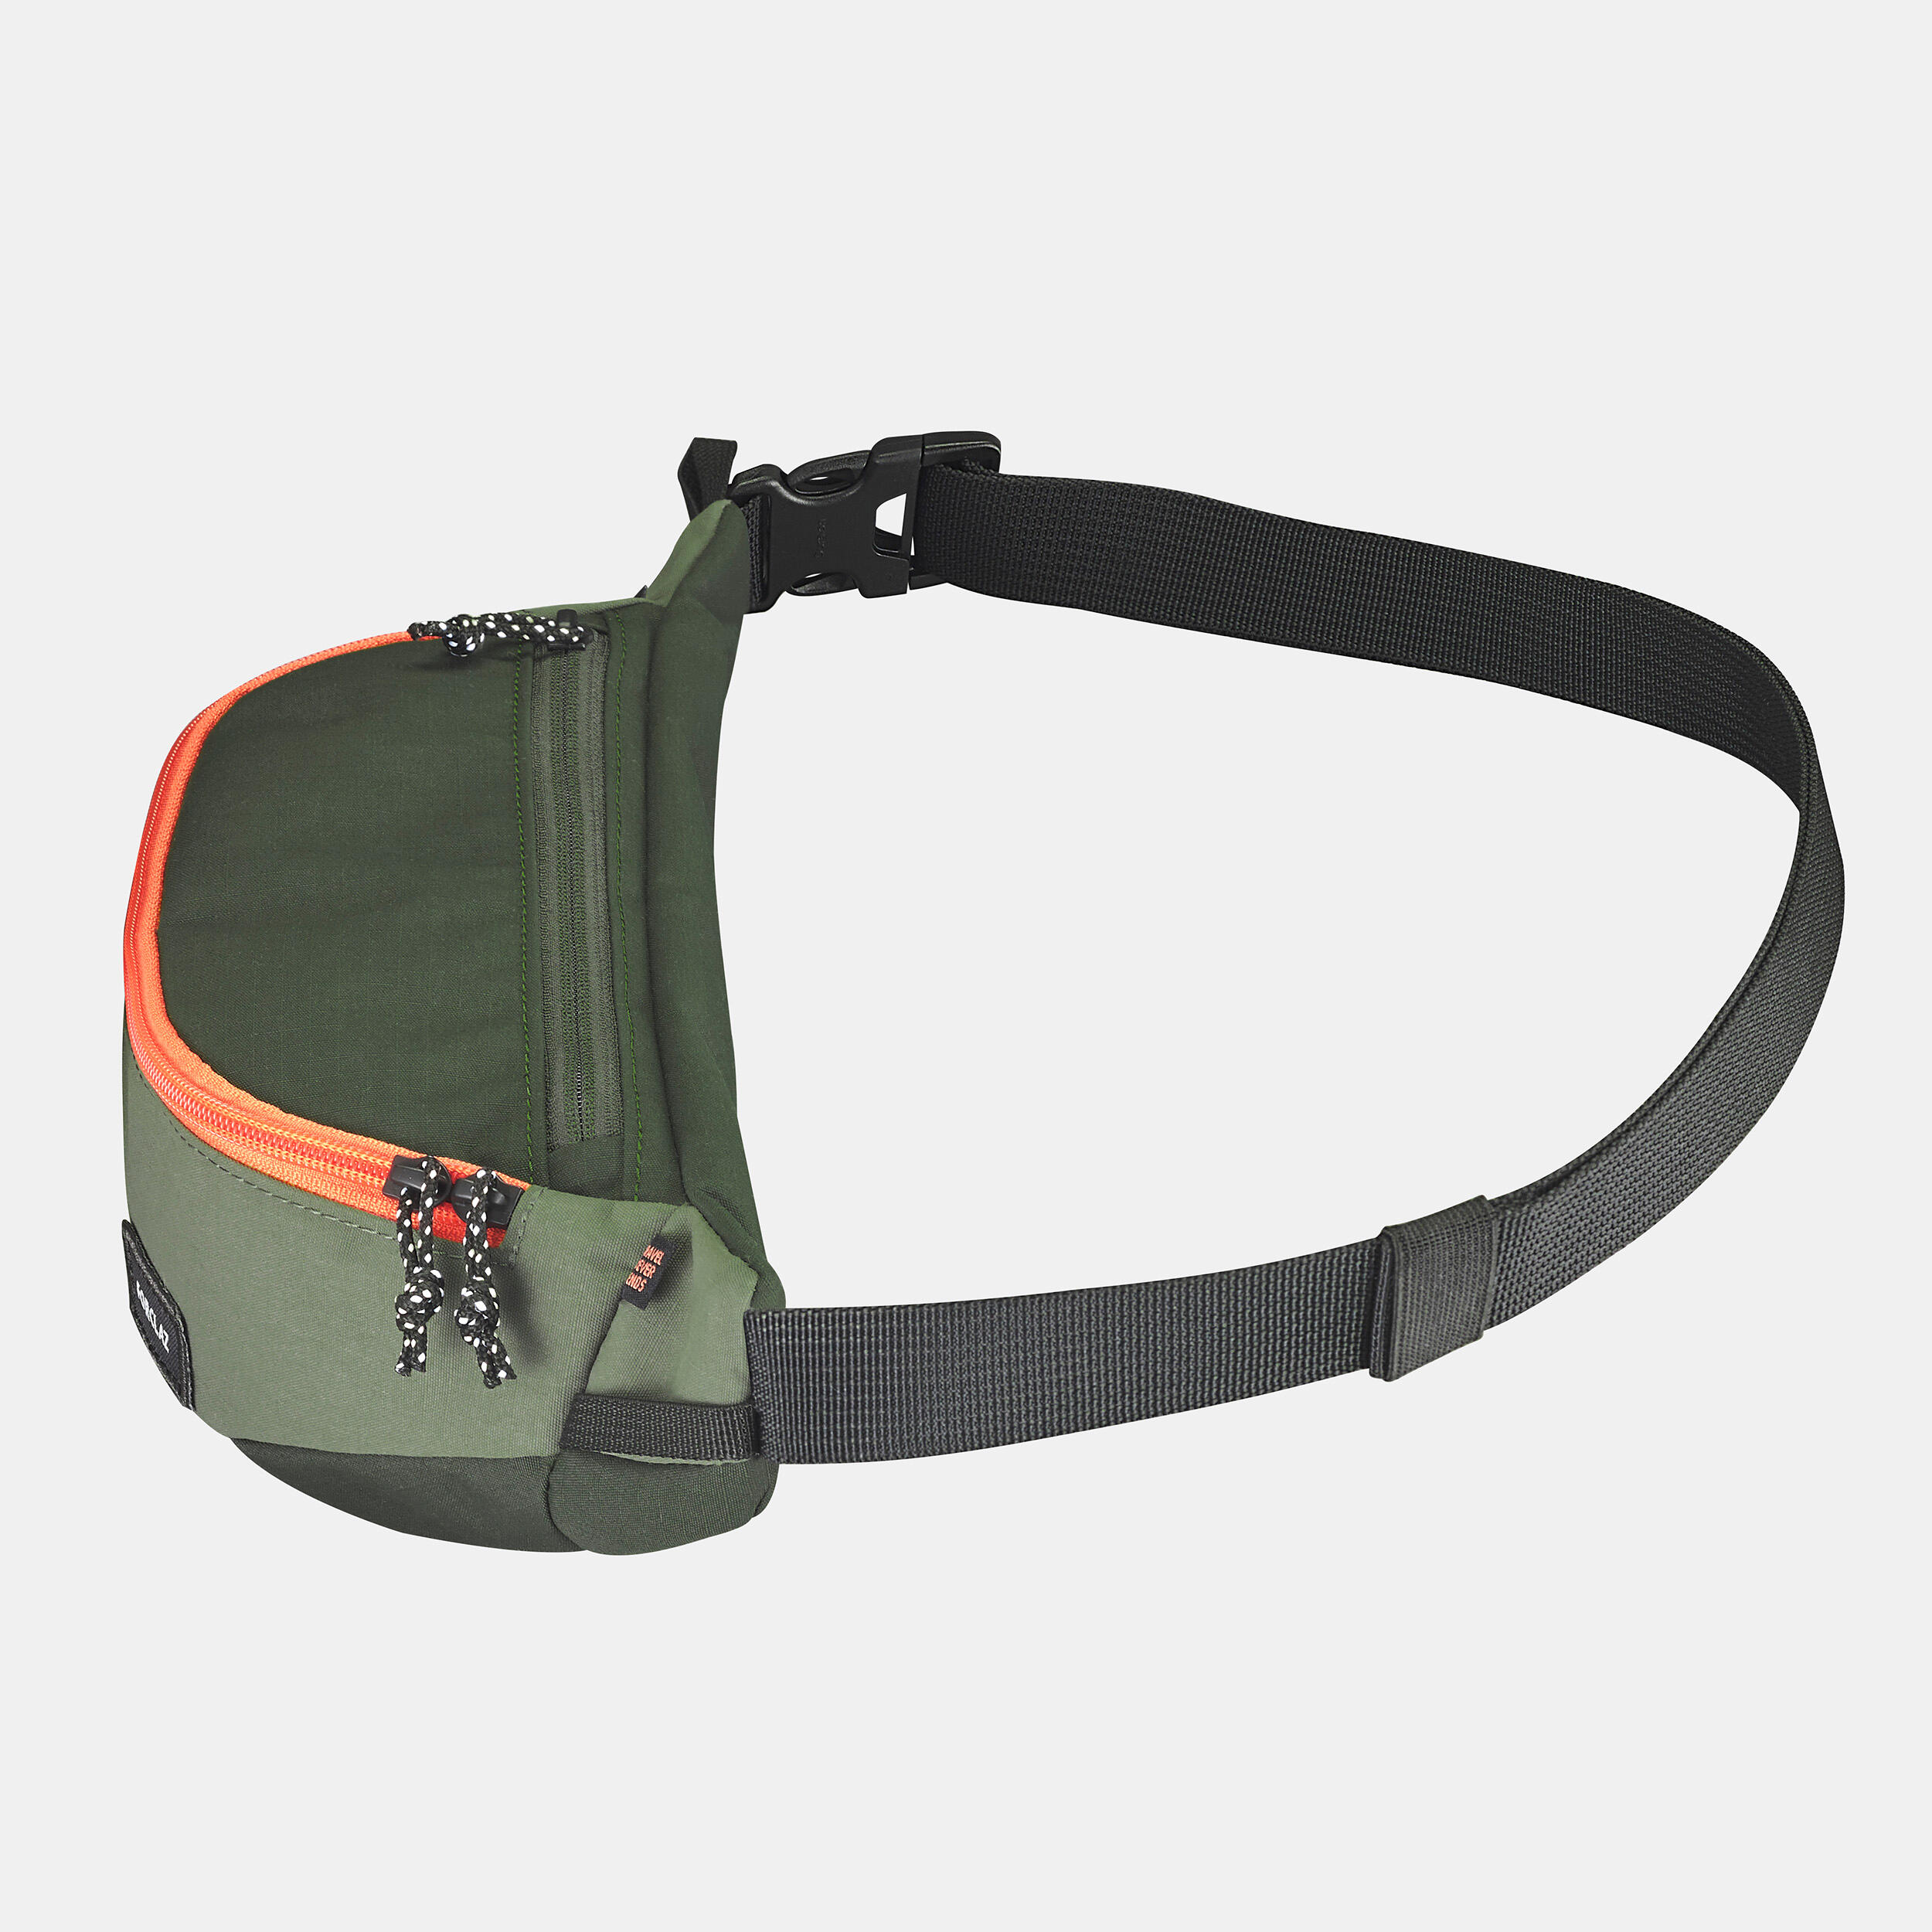 Hiking Accessories Ultracompact Belt Bag Grey  Now Buy Online In India On  DecathlonIn